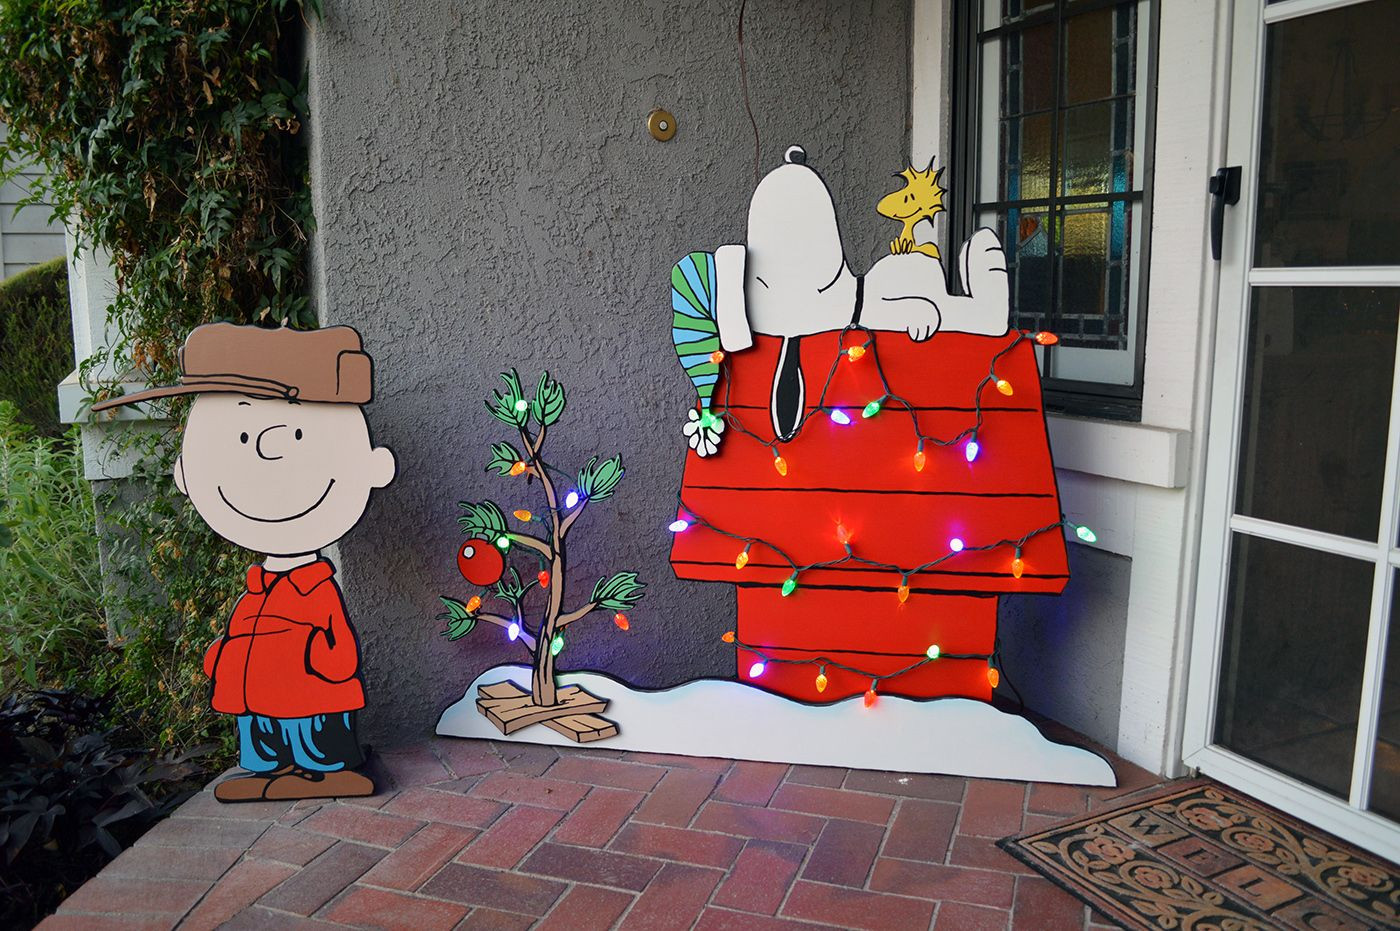 Peanuts Outdoor Christmas Decorations
 Made some Peanuts themed yard art for my wife will add